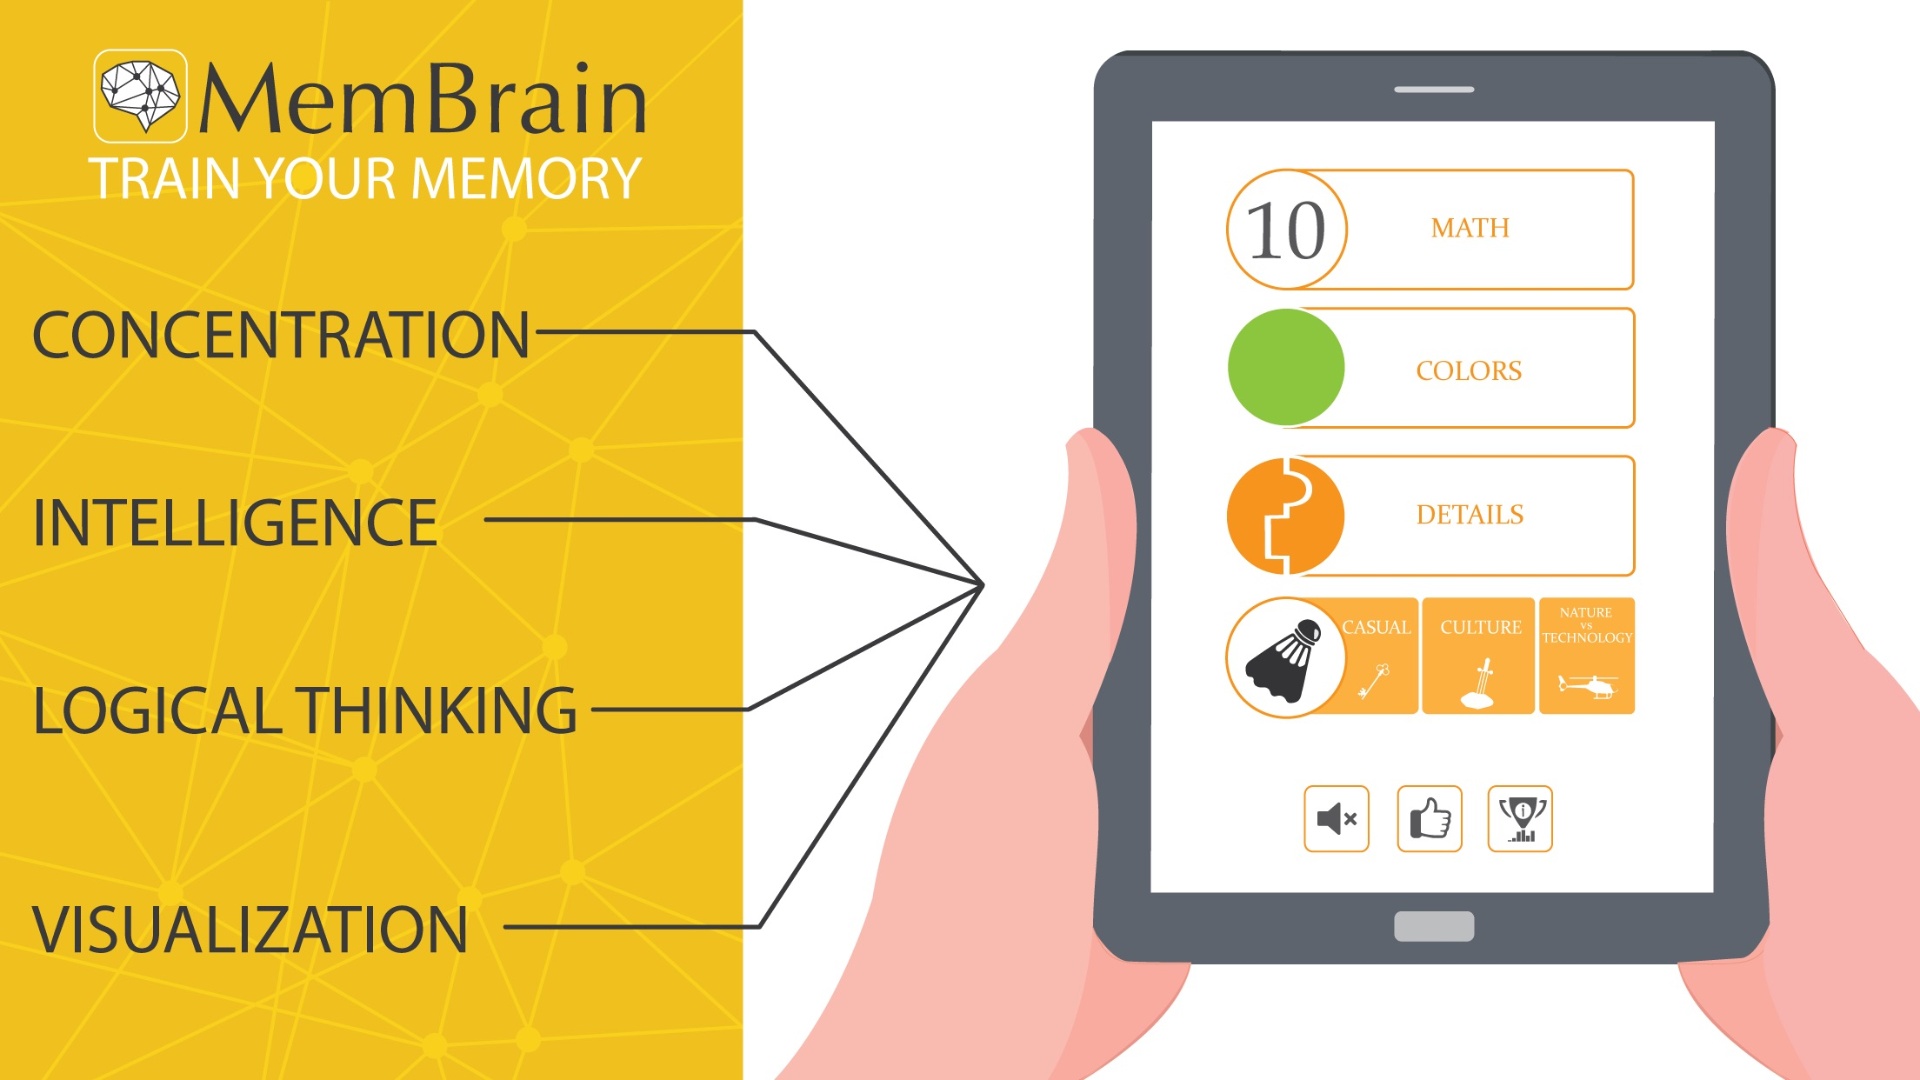 Learn How to Download Fit Brain Trainer: A Research-Based Game to Improve Memory